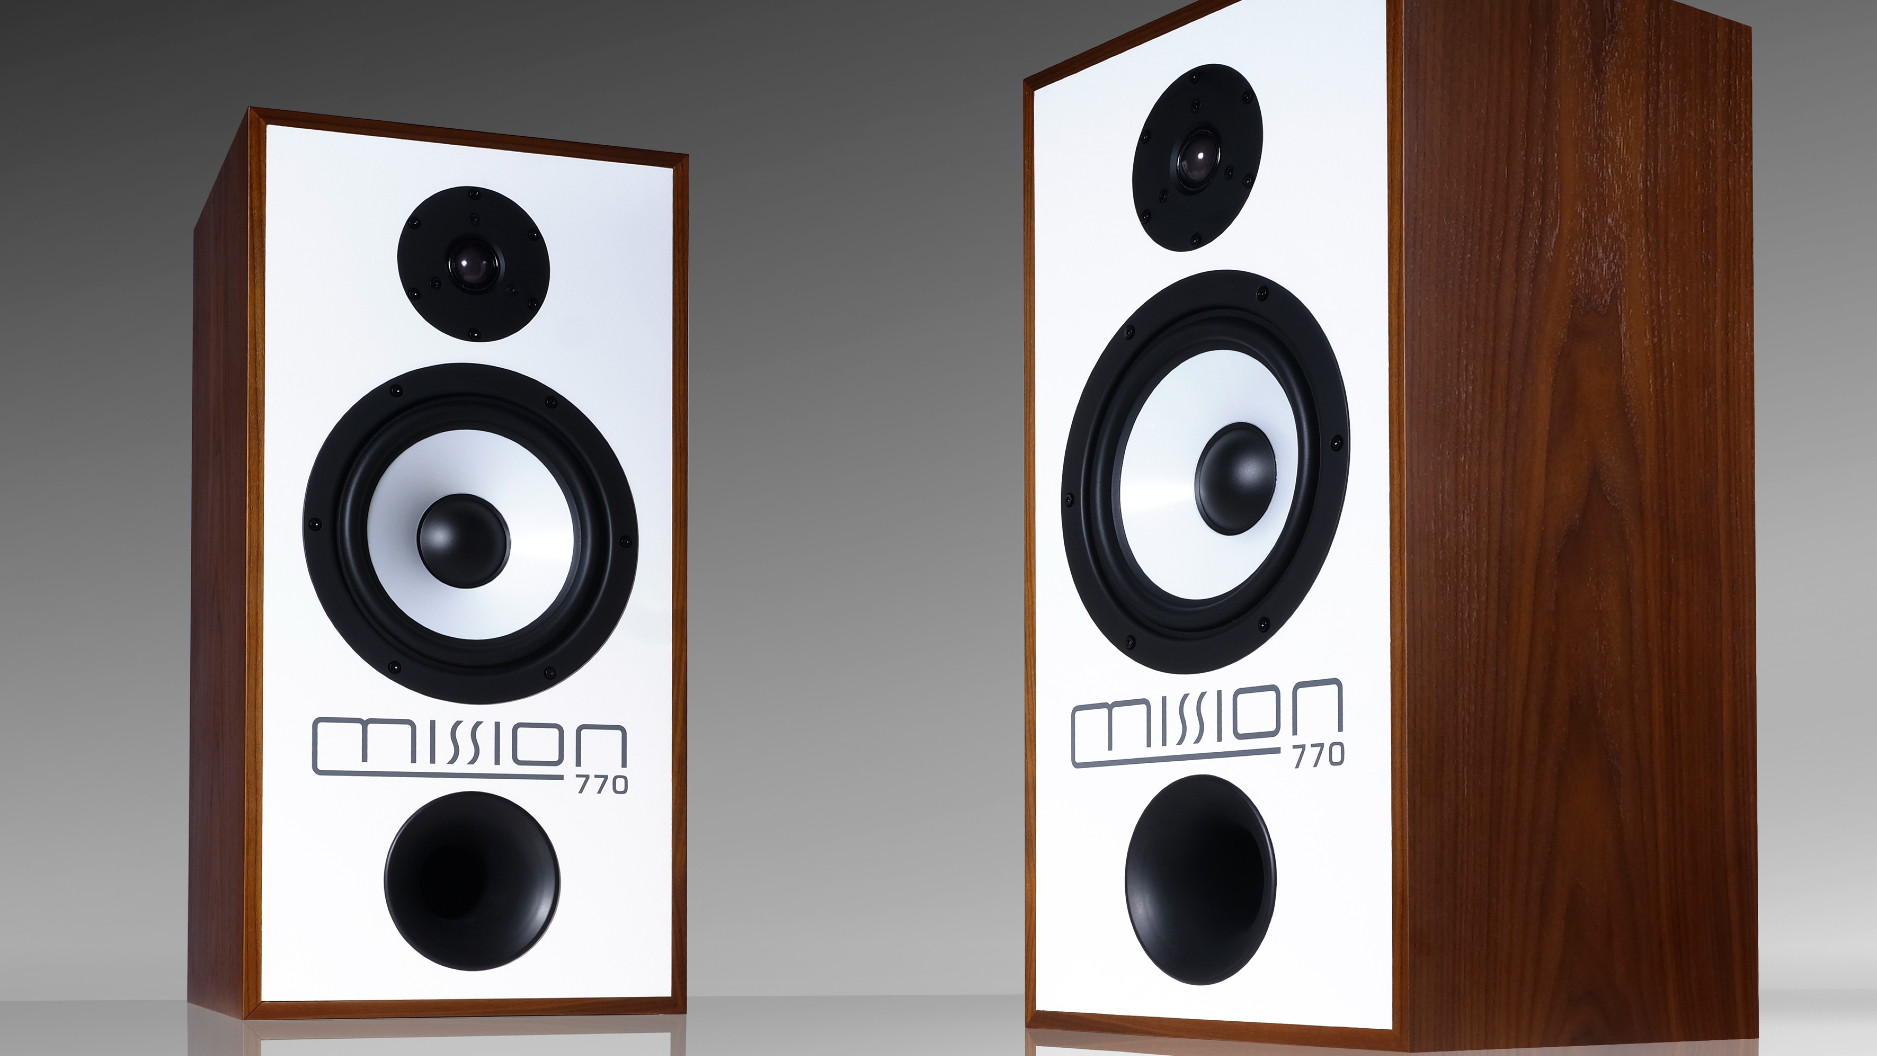 The new Mission 770 standmount speakers